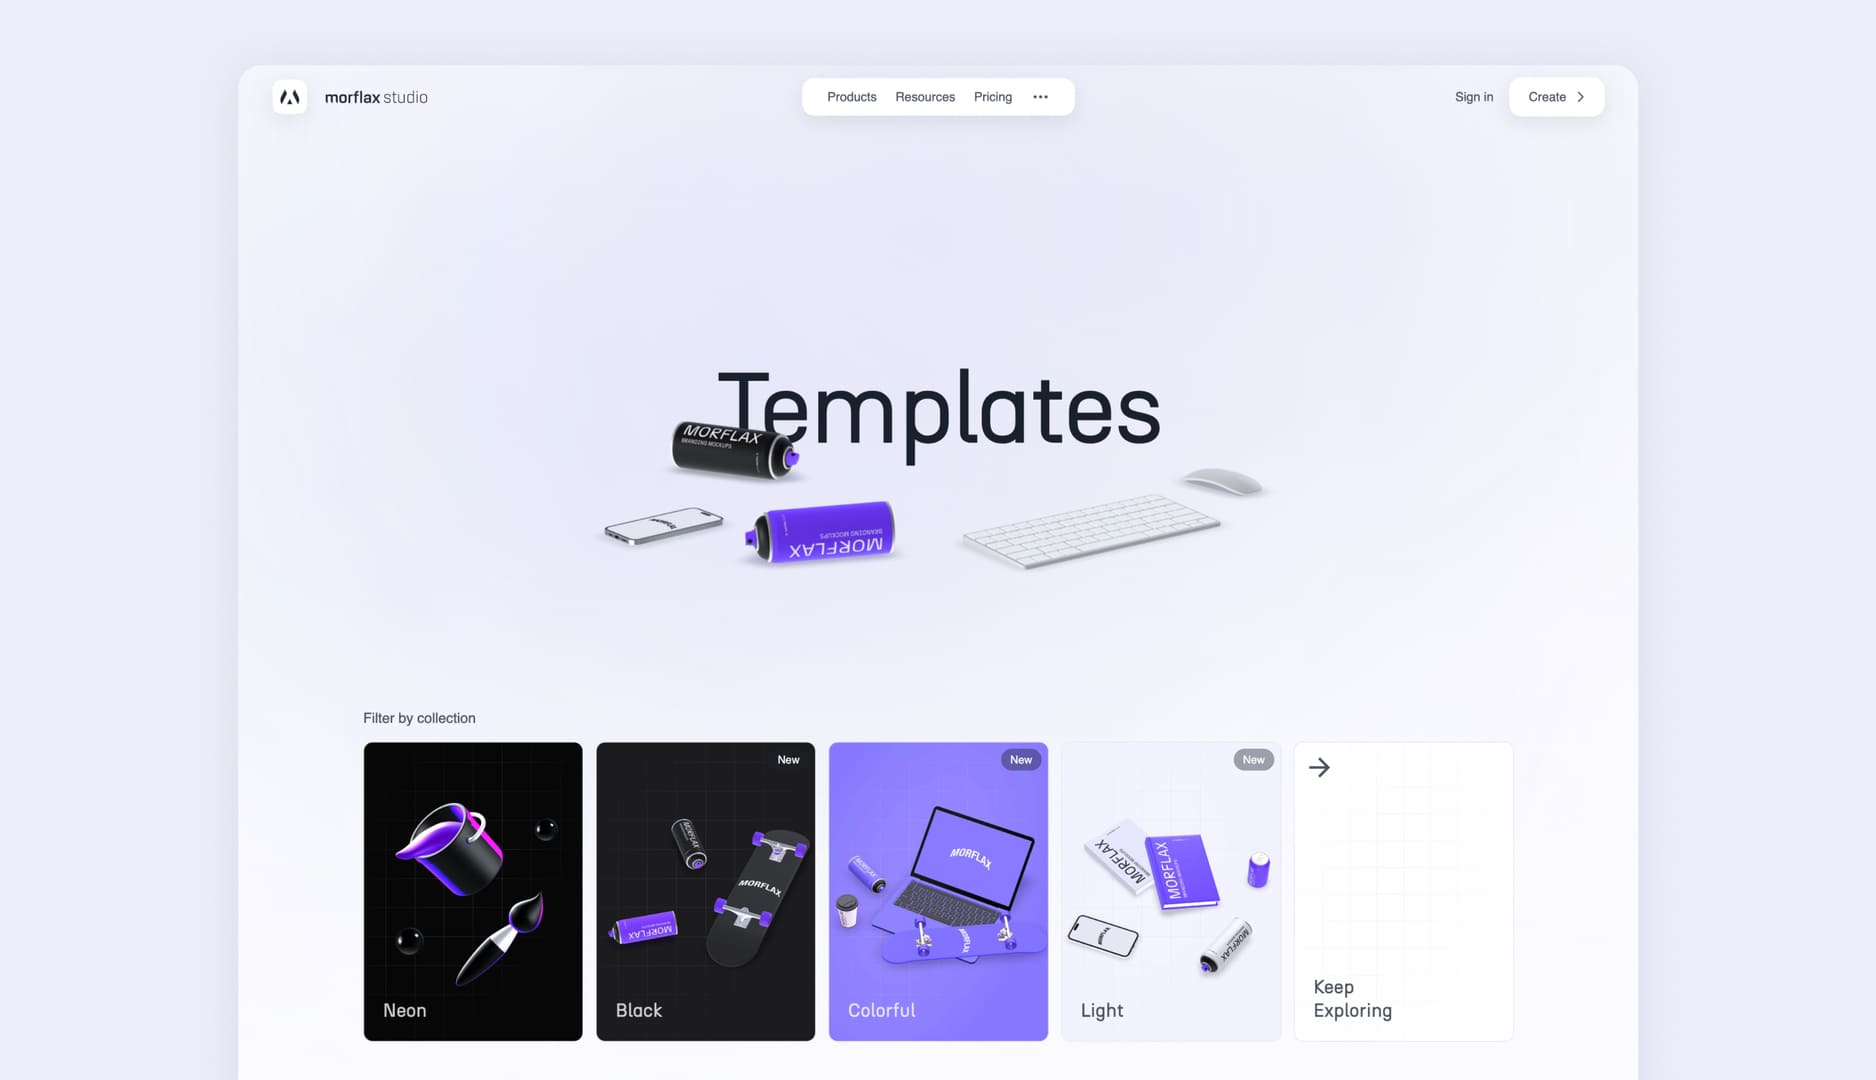 Morflax studio templates - Explore our latest 3D devices and branding mockup templates.